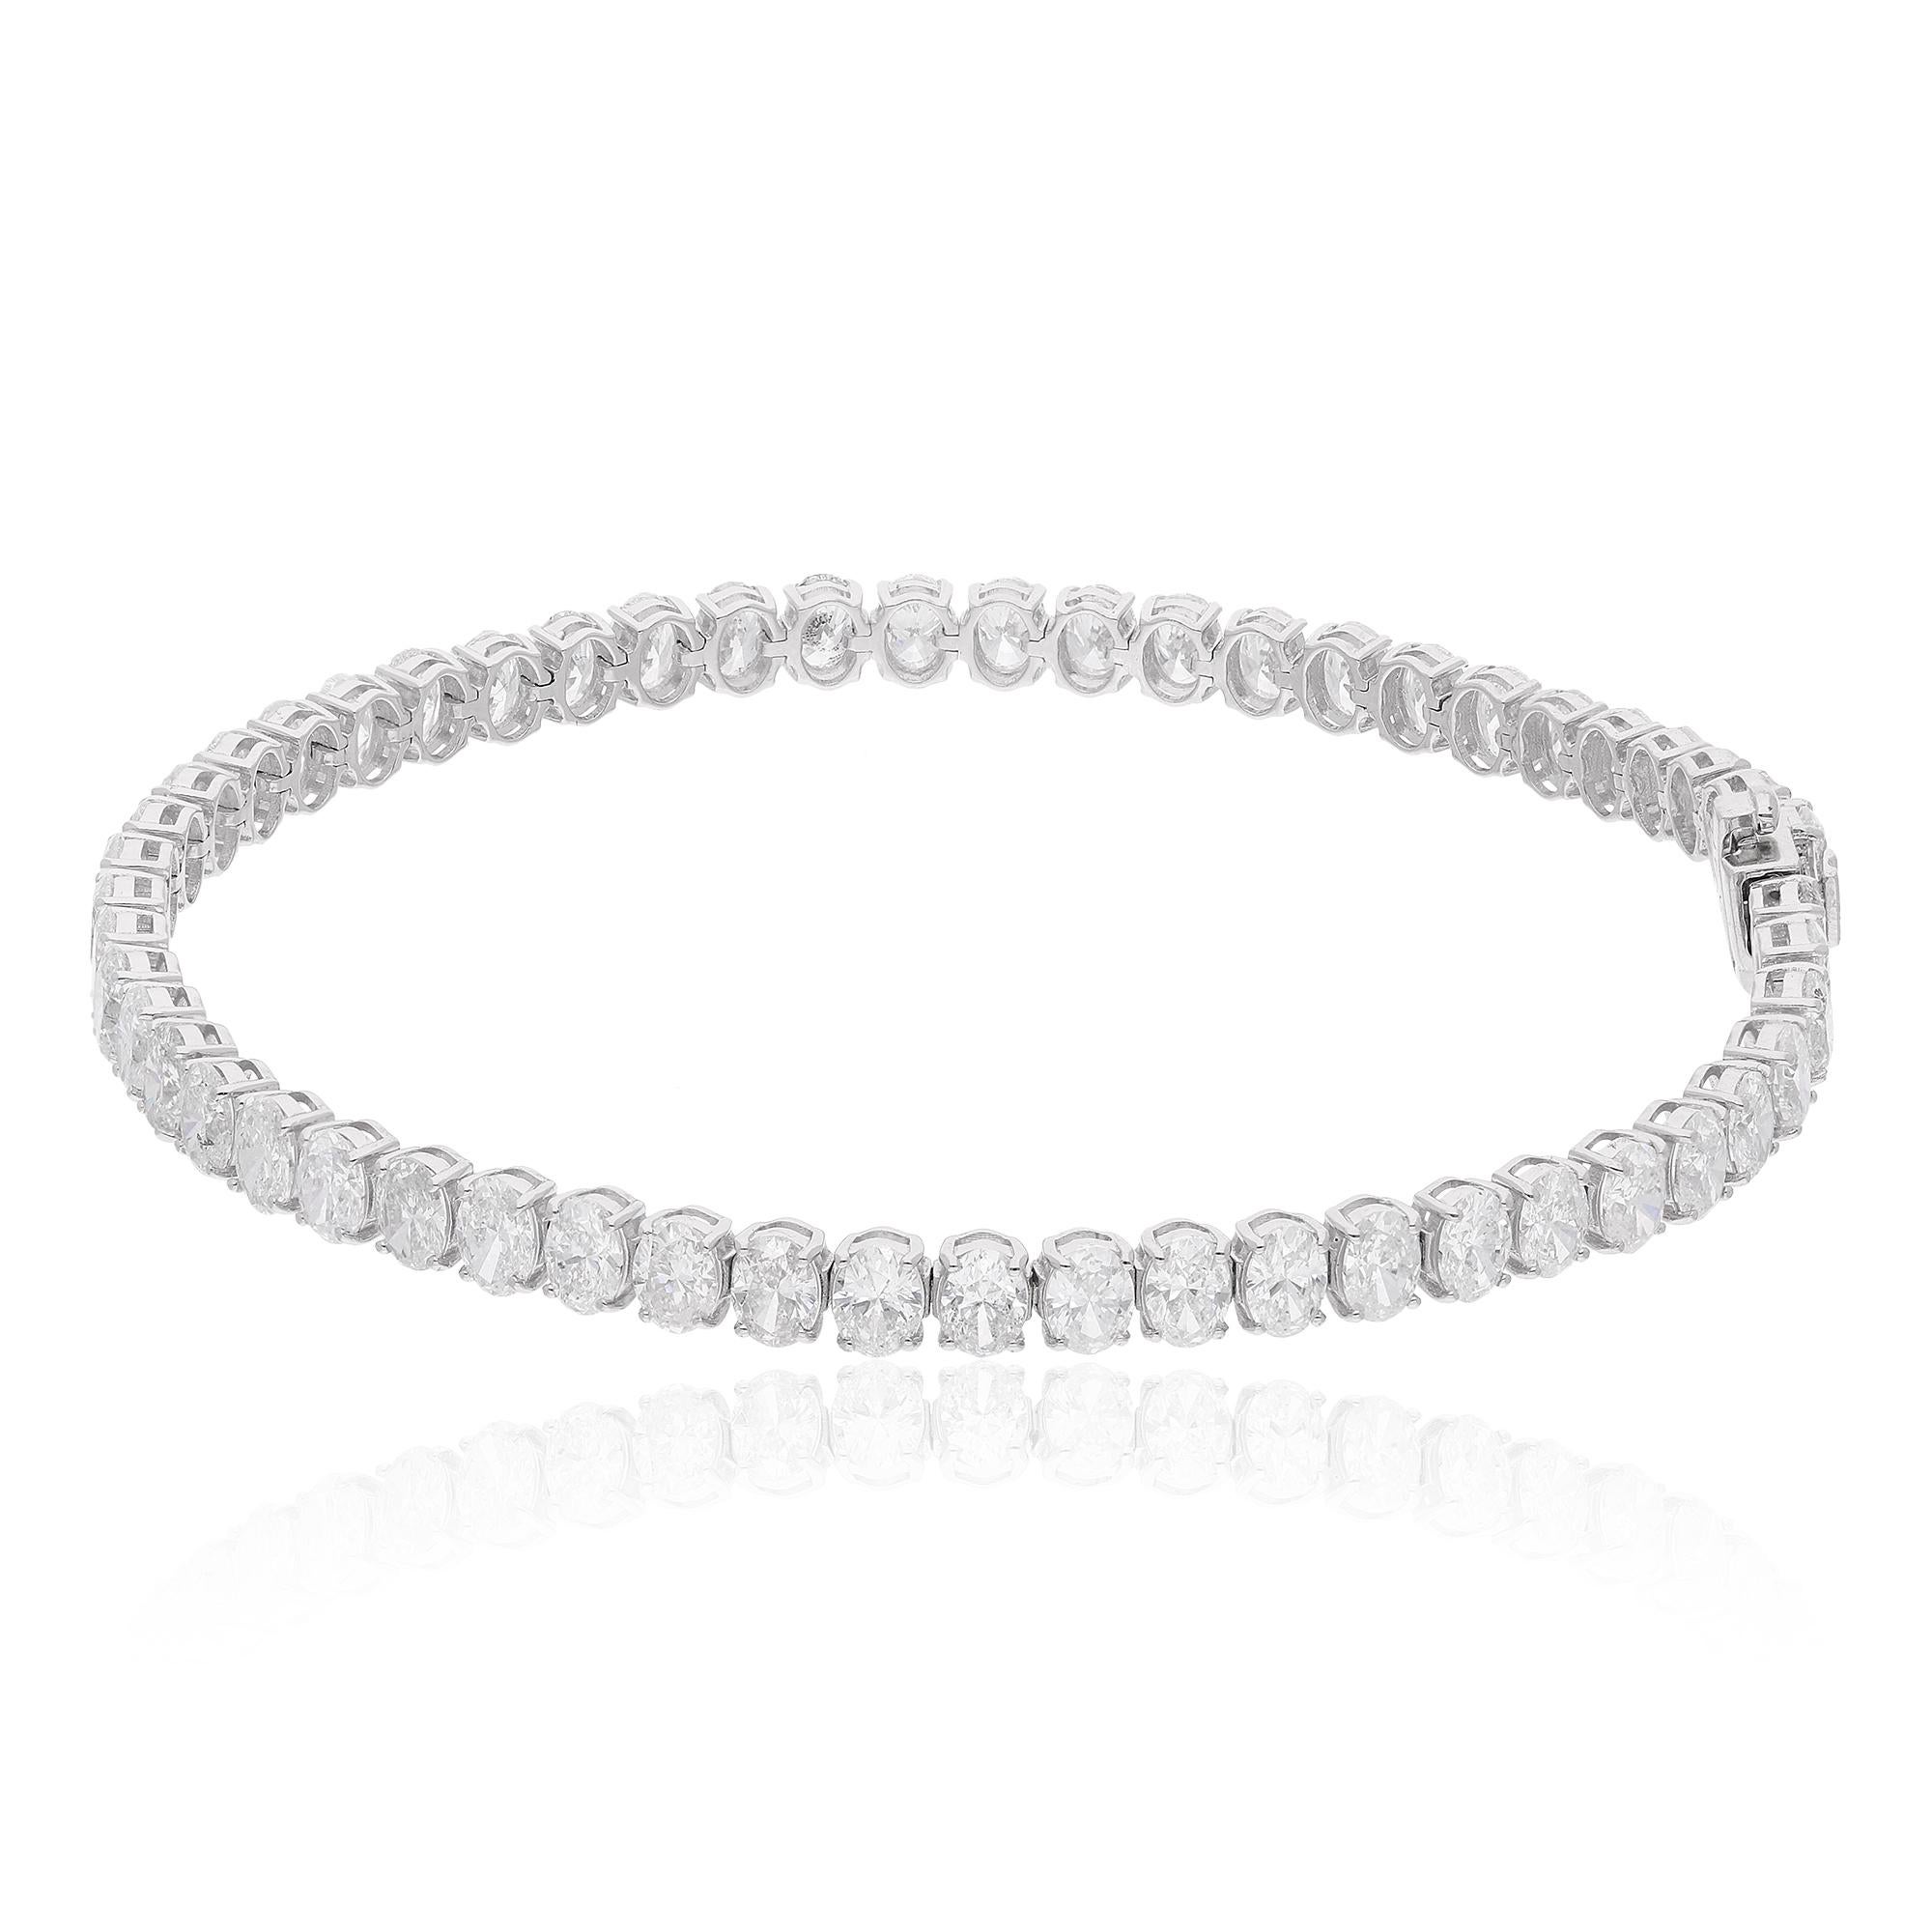 Item Code :- SEBR-43404E
Gross Wt. :- 8.14 gm
18k White Gold Wt. :- 6.64 gm
Natural Diamond Wt. :- 7.48 Ct. ( AVERAGE DIAMOND CLARITY SI1-SI2 & COLOR H-I )
Bracelet Length :- 7 Inches Long

✦ Sizing
.....................
We can adjust most items to